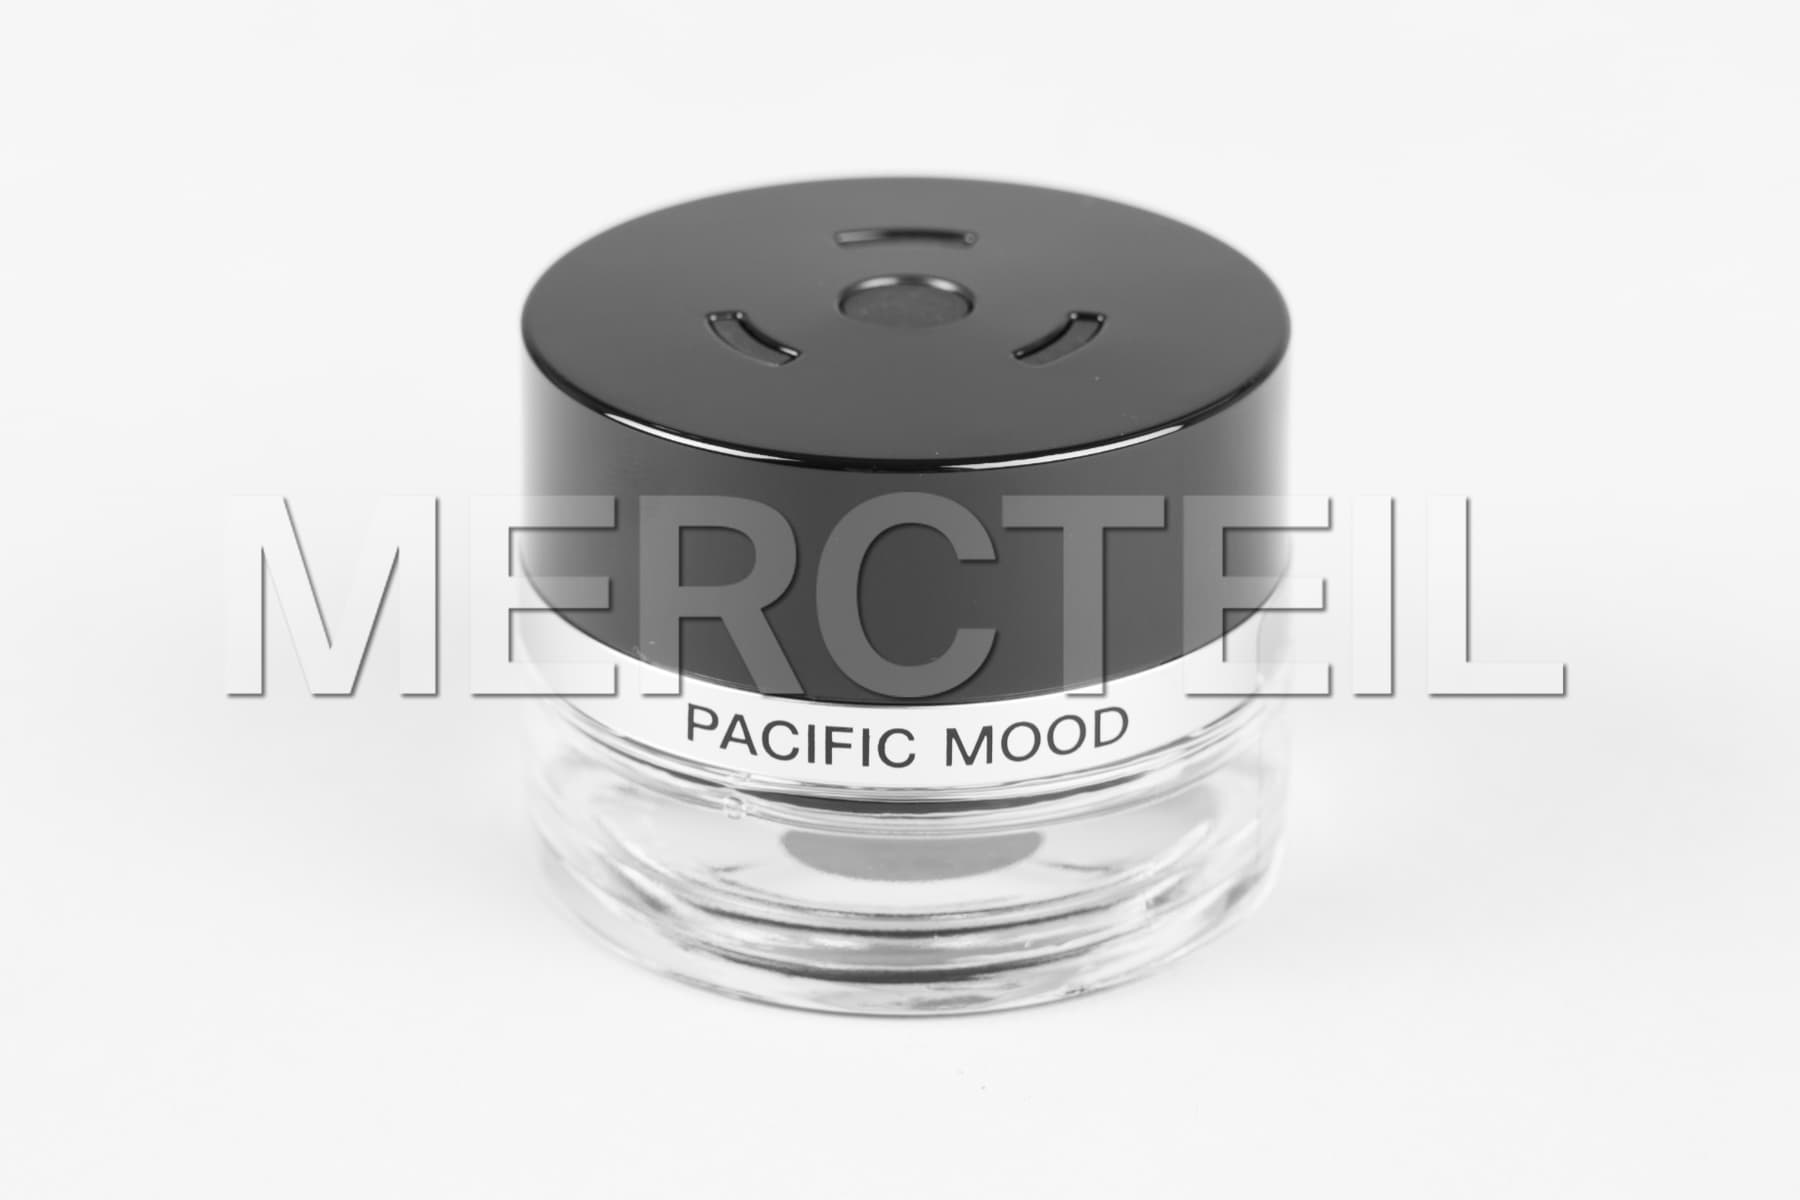 Fragrance Air Balance Pacific Mood Bottle Genuine Mercedes Benz(part number: A0008990900)